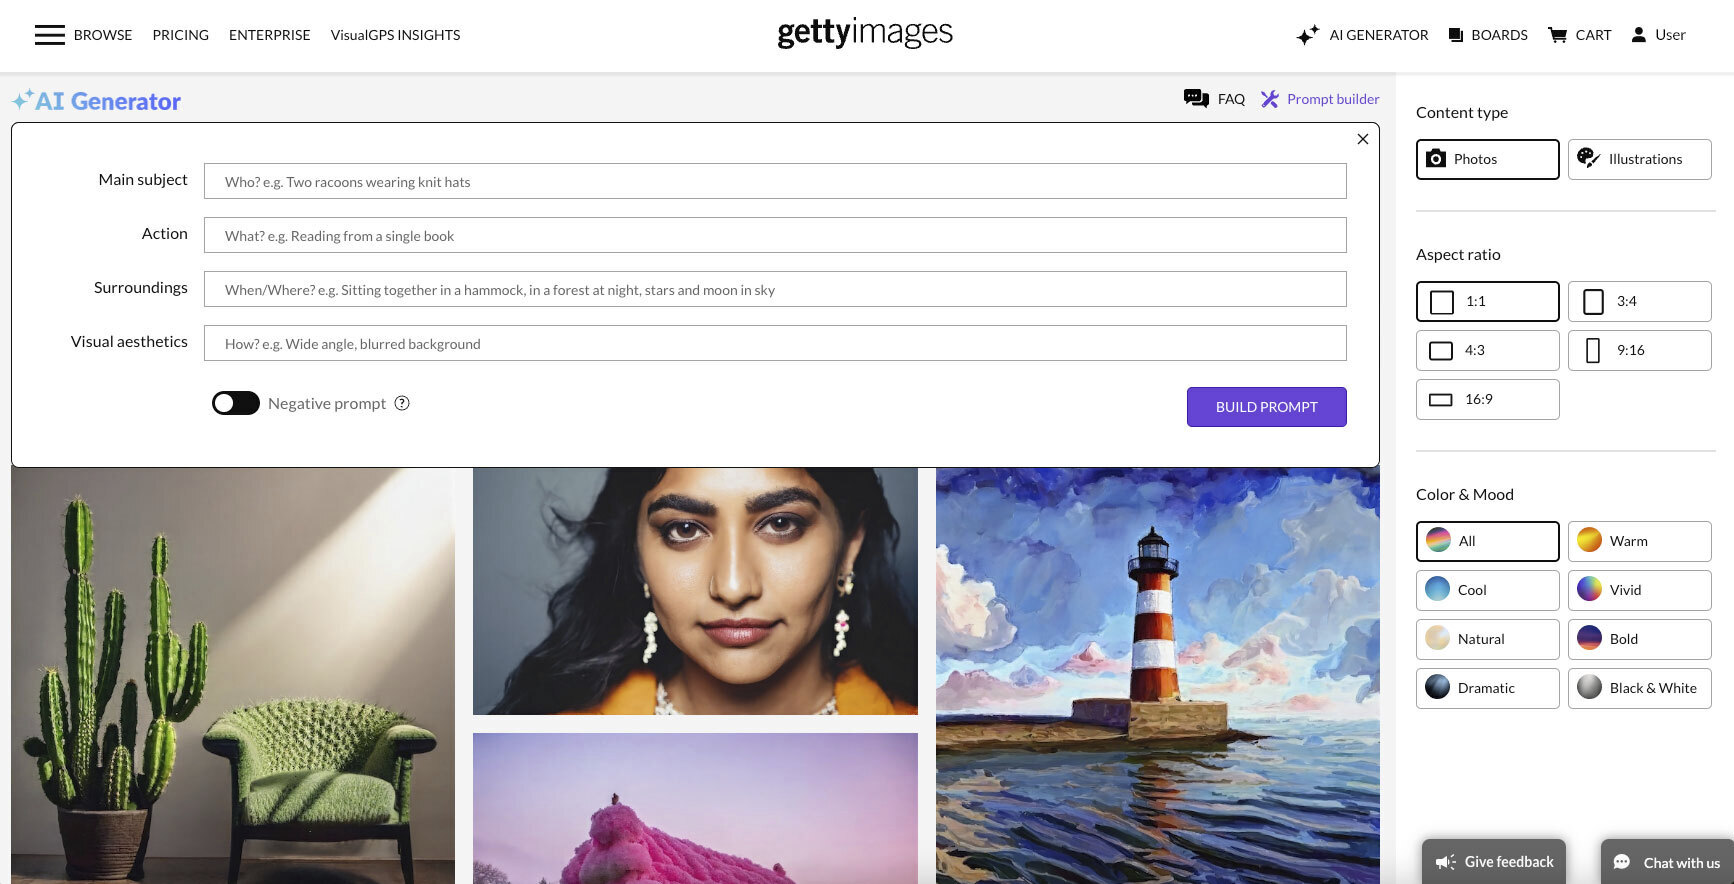 Photo giant Getty took a leading AI image-maker to court. Now it's